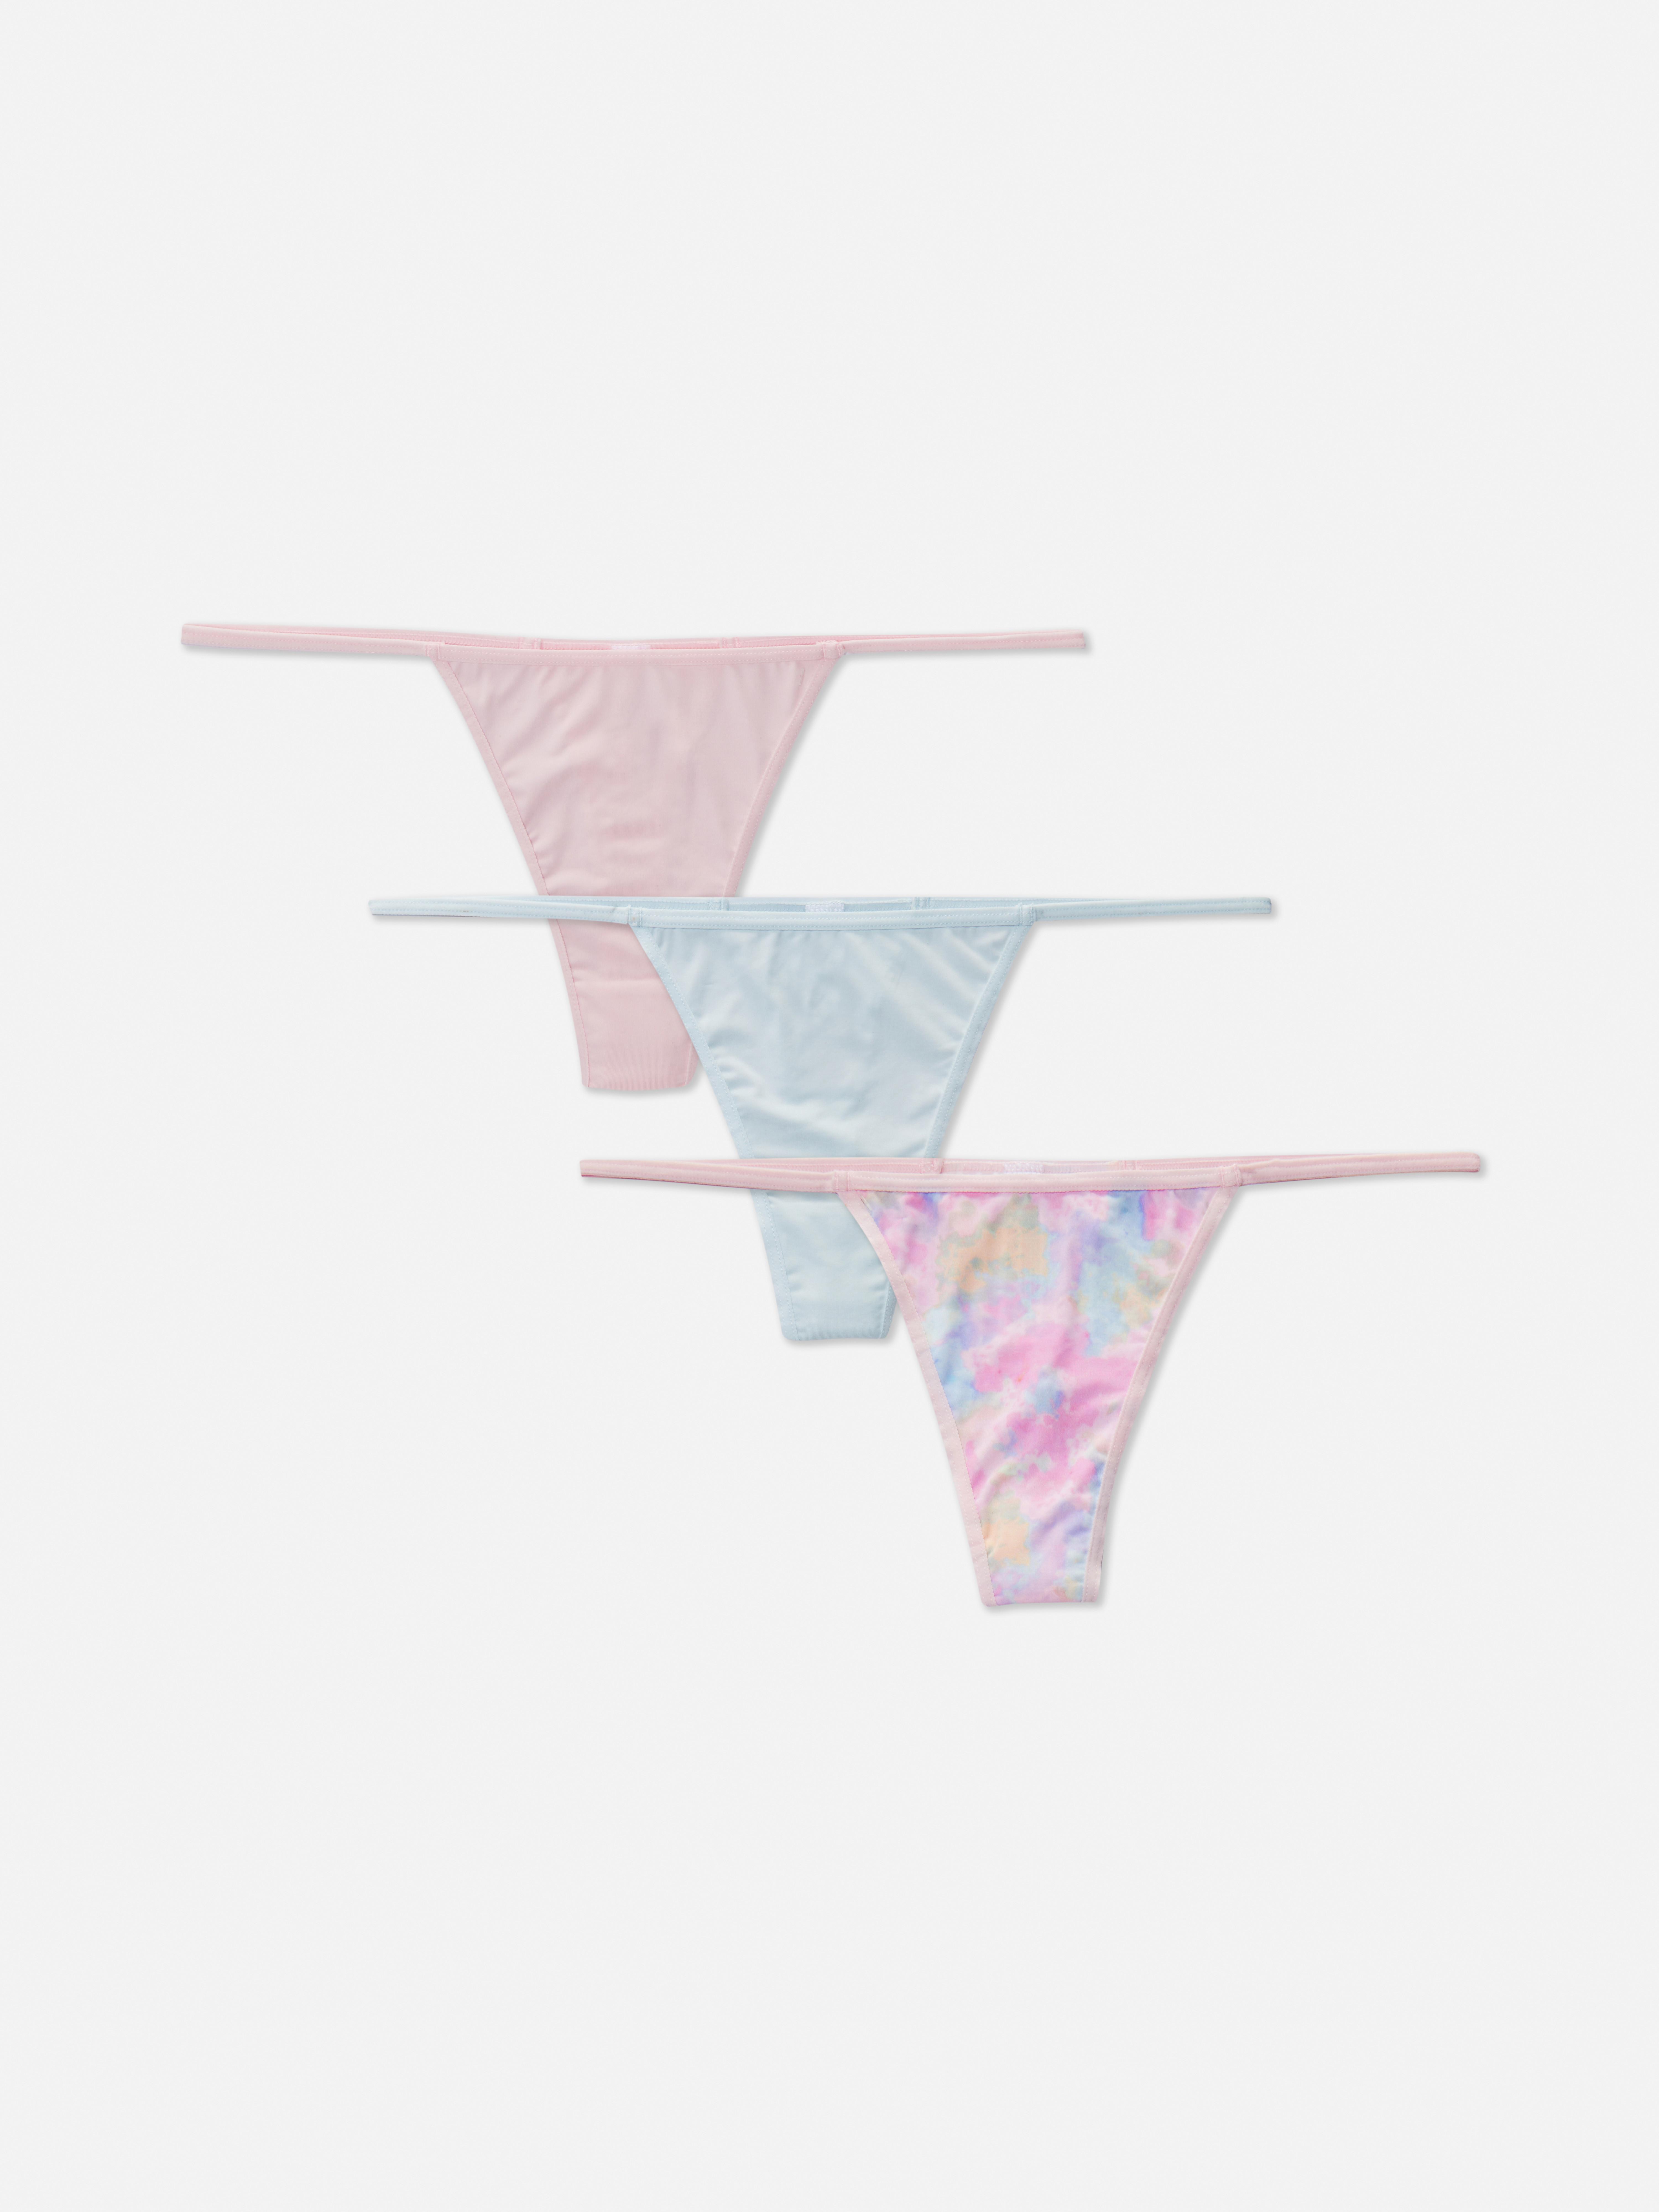 Primark - P-p-pick up a pant!! Primark have frilly thongs, lace frenchies  and heart smothered cotton briefs in store now, all from £1 to £2.50!